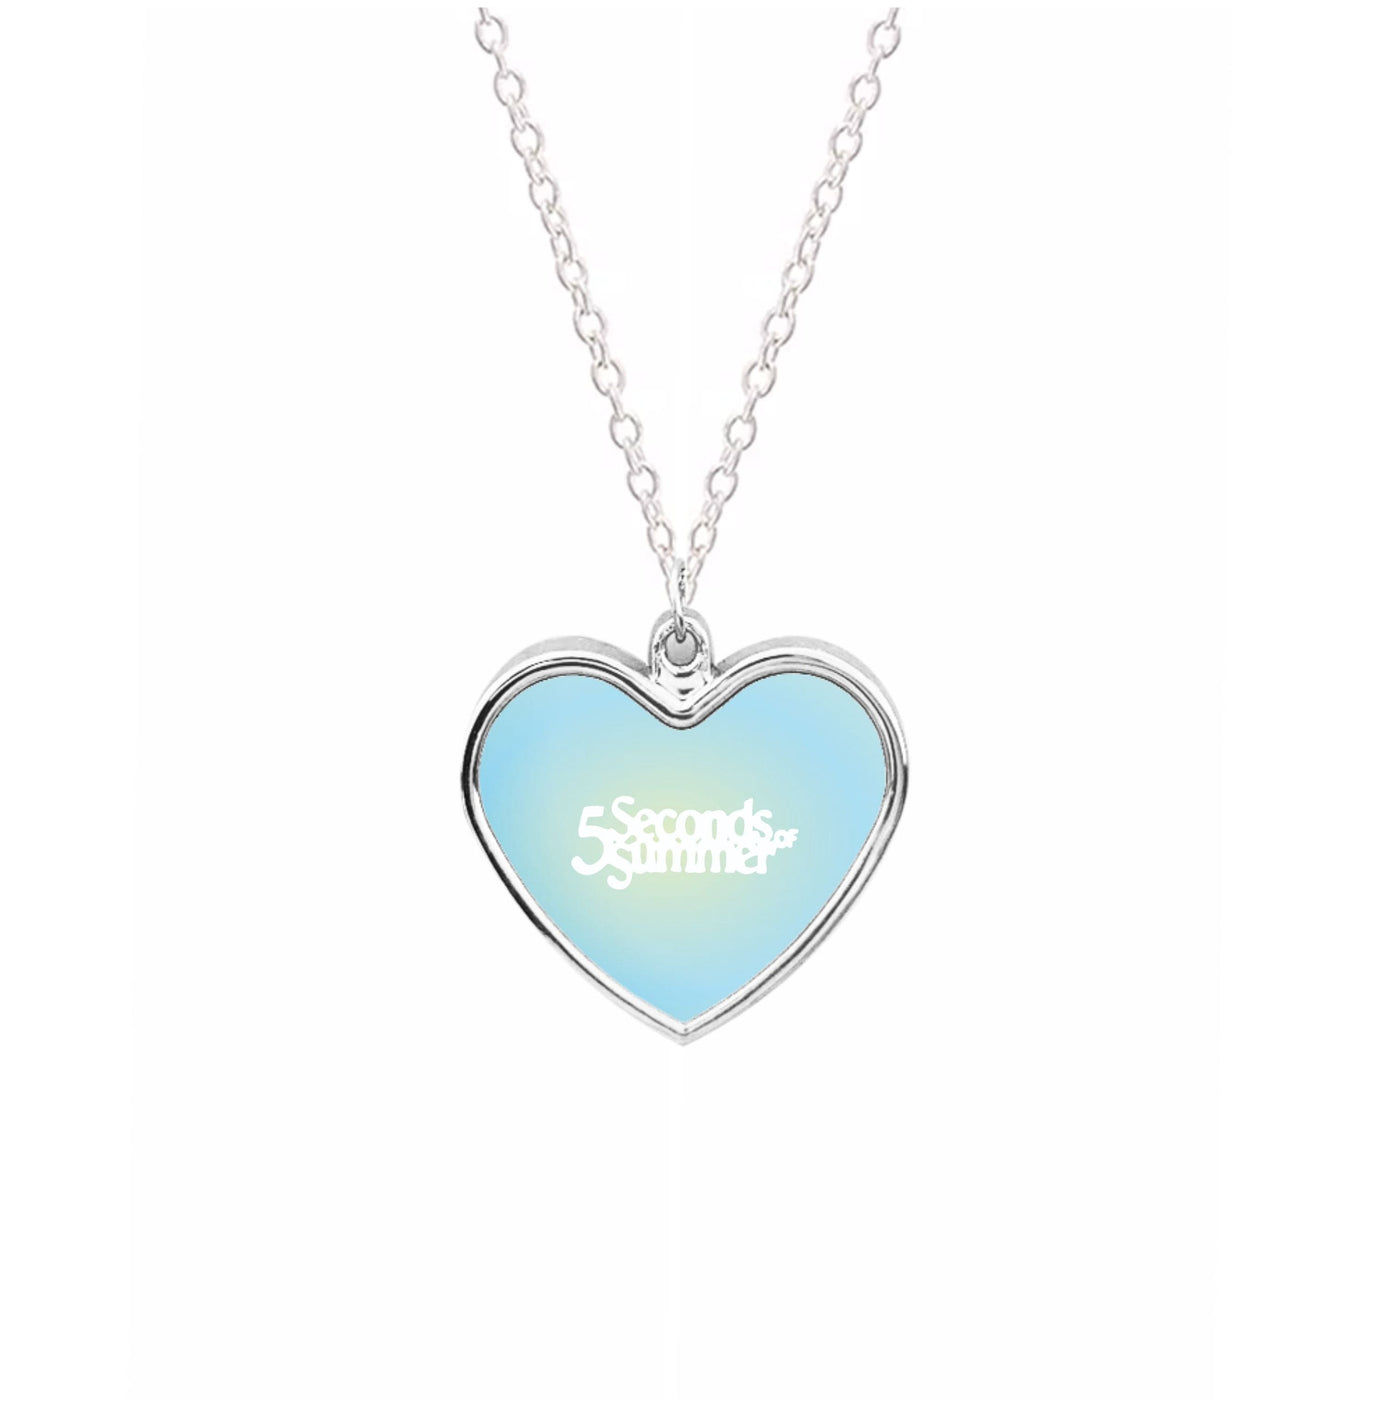 Green And Blue - 5 Seconds Of Summer  Necklace